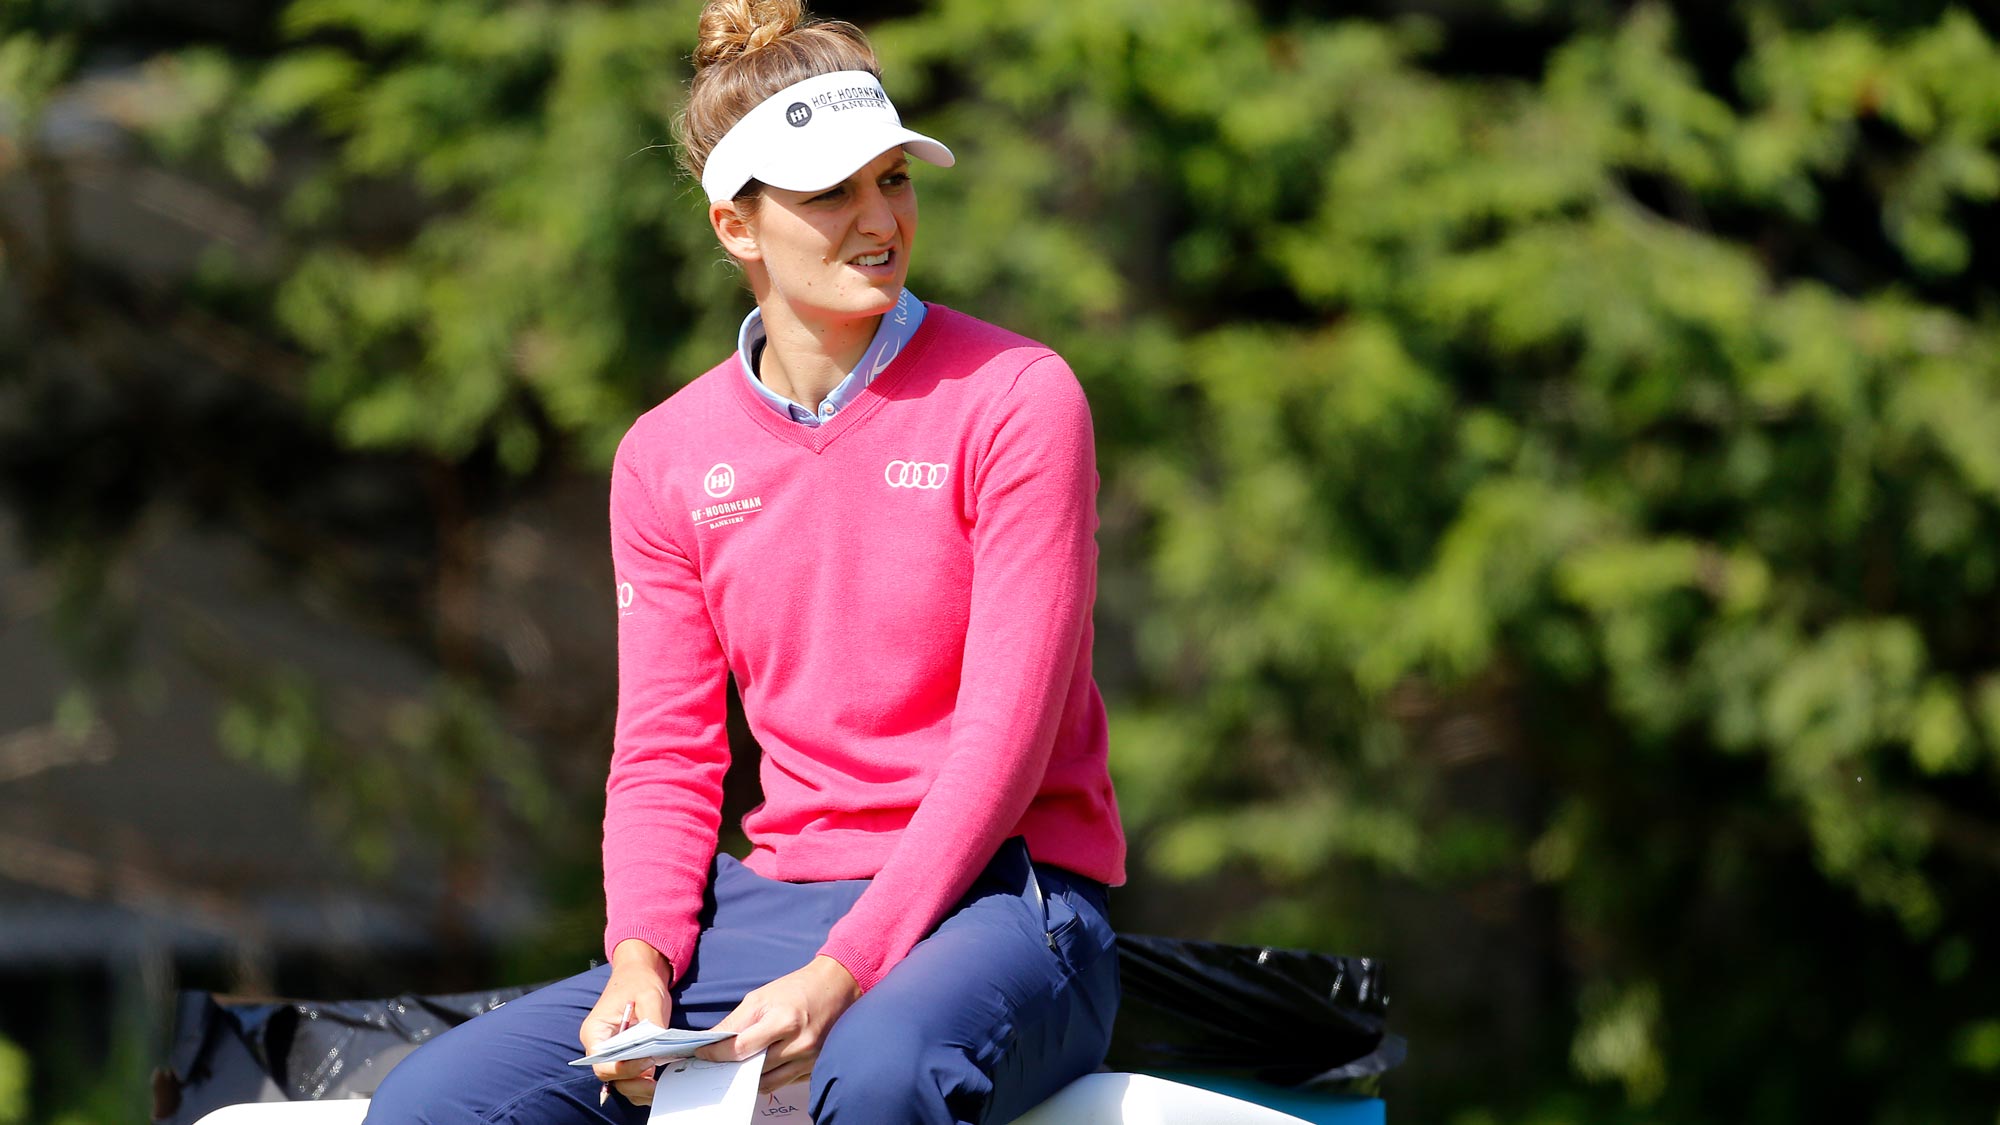 Anne van Dam of the Netherlands waits to hit on the 3rd hole during the second round of the LPGA Mediheal Championship